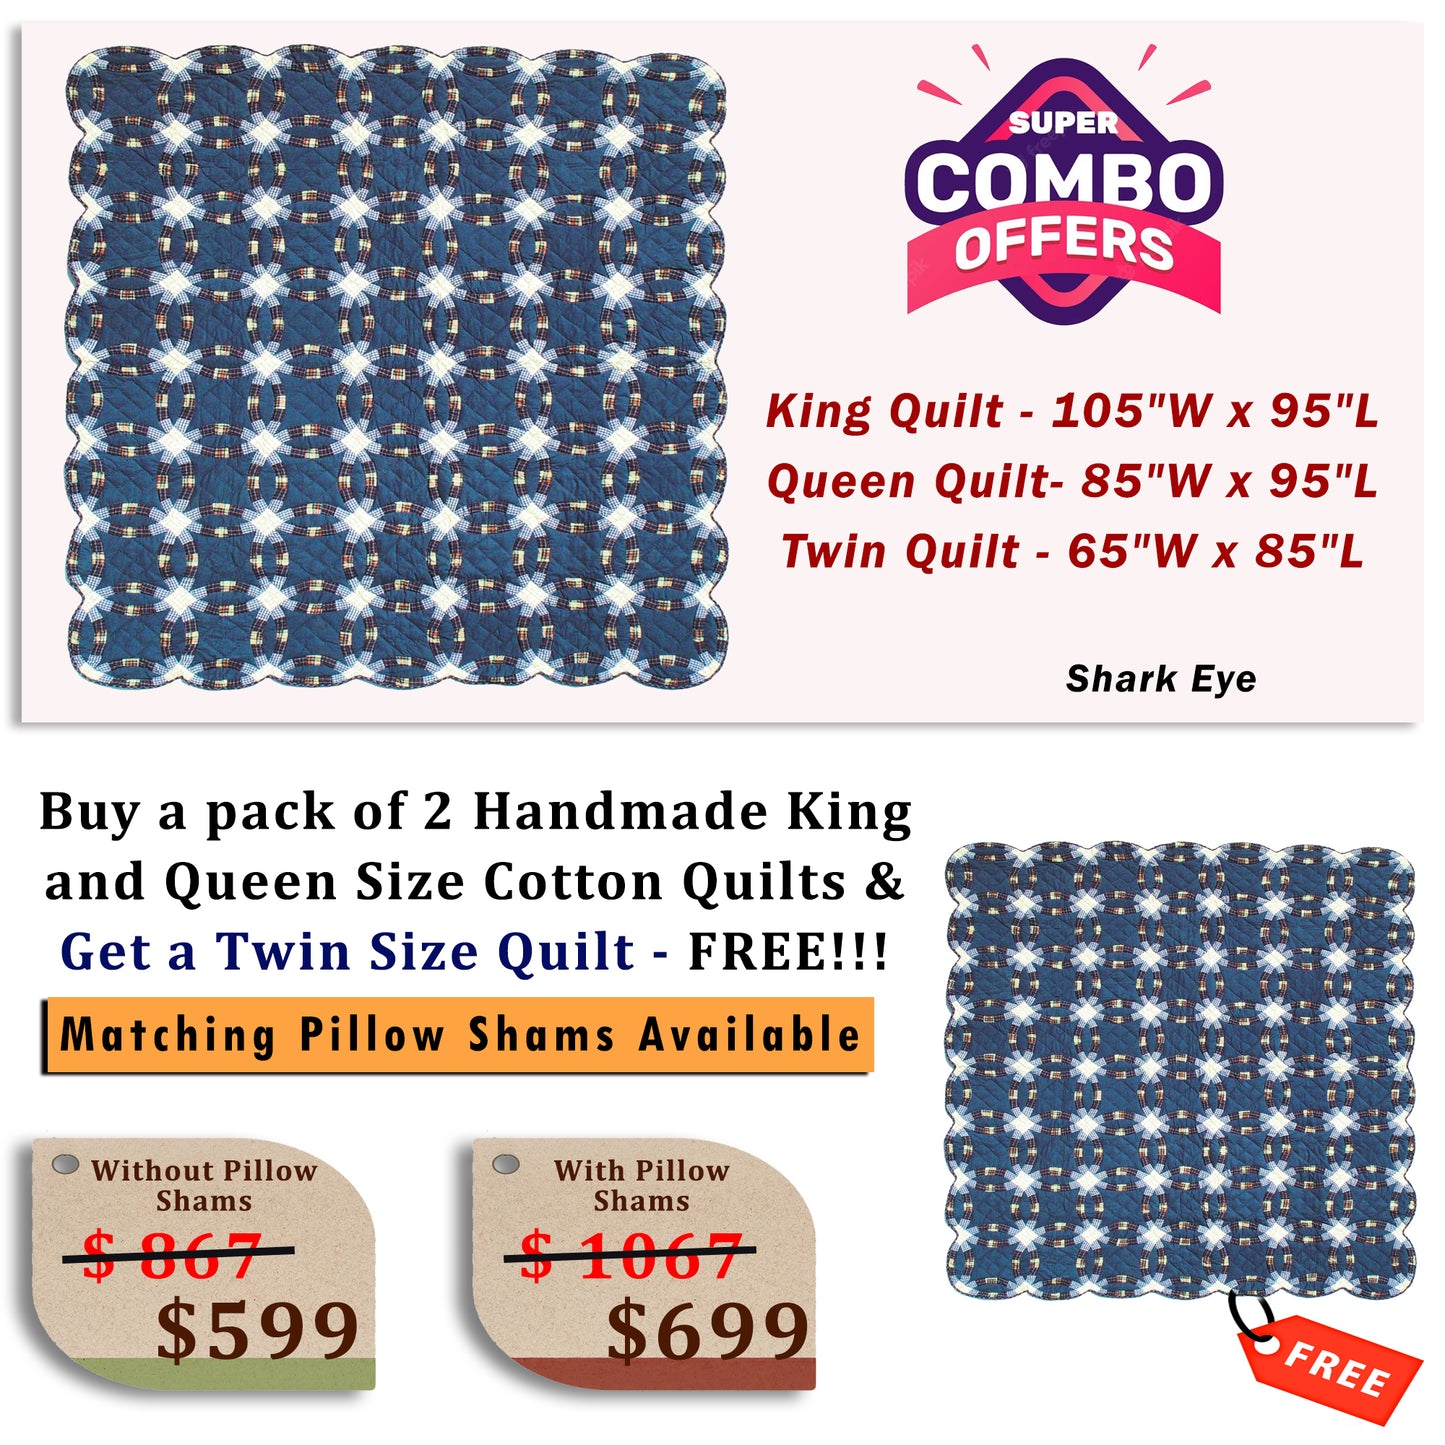 Shark Eyes- Buy a pack of King and Queen Size Quilt, and get a Twin Size Quilt FREE!!!